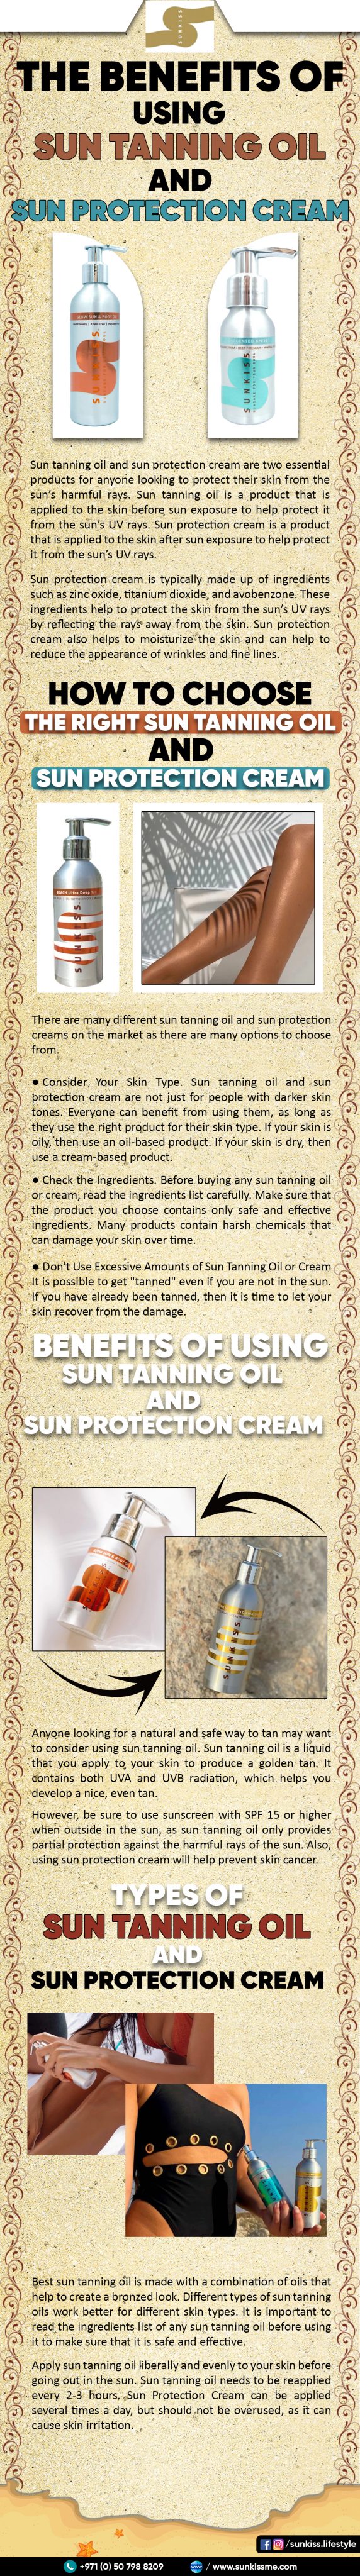 The Benefits Of Using Sun Tanning Oil And Sun Protection Cream